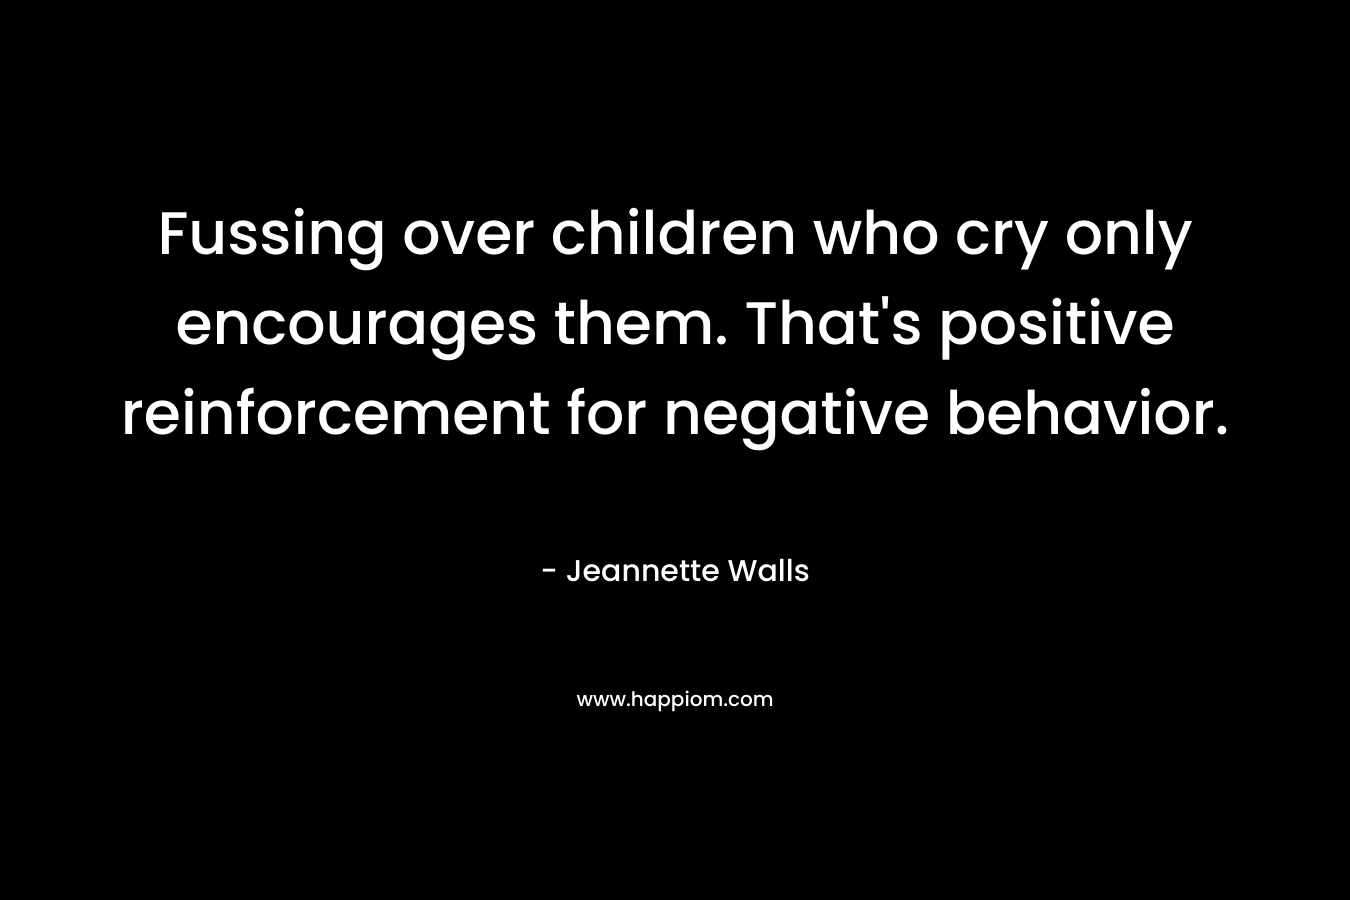 Fussing over children who cry only encourages them. That's positive reinforcement for negative behavior.